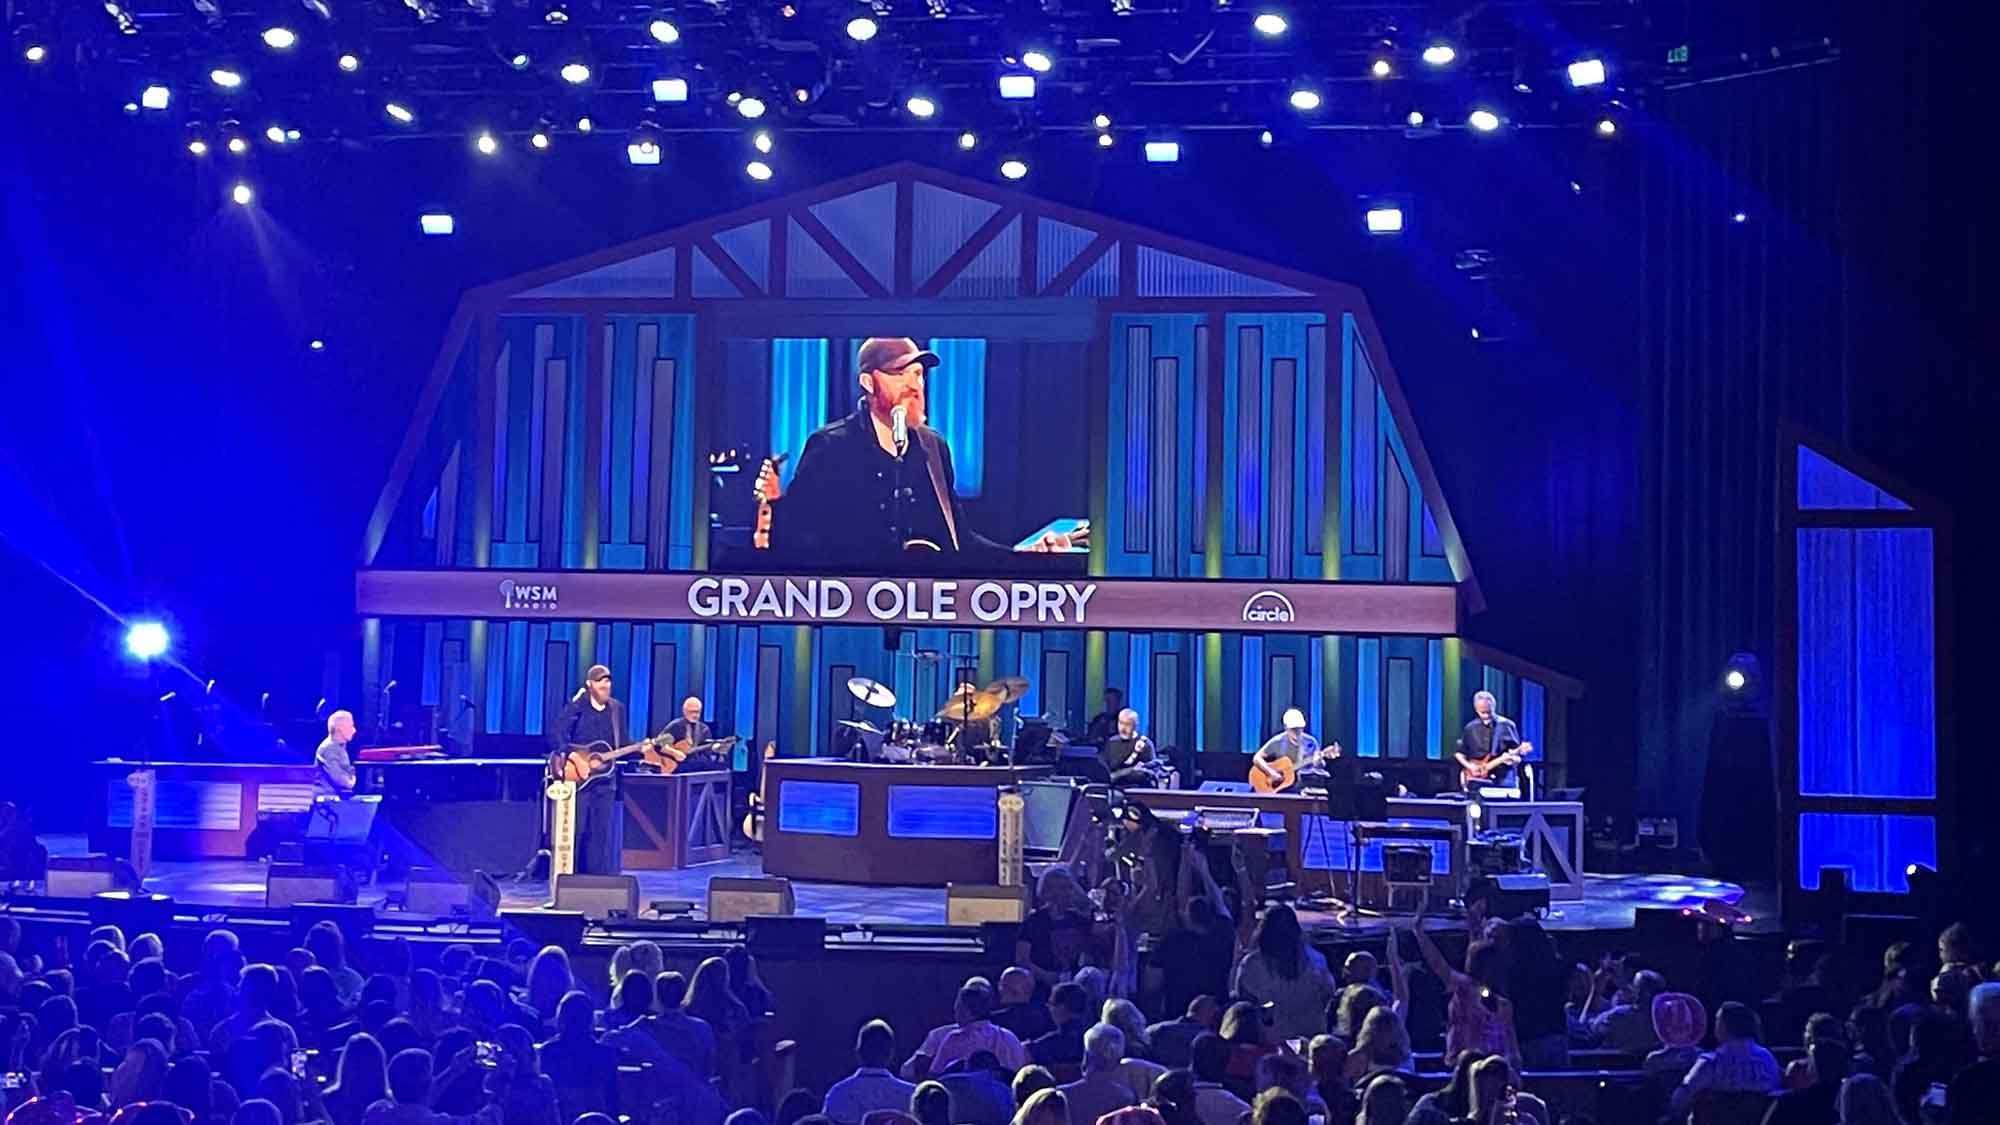 The Grand Ole Opry.